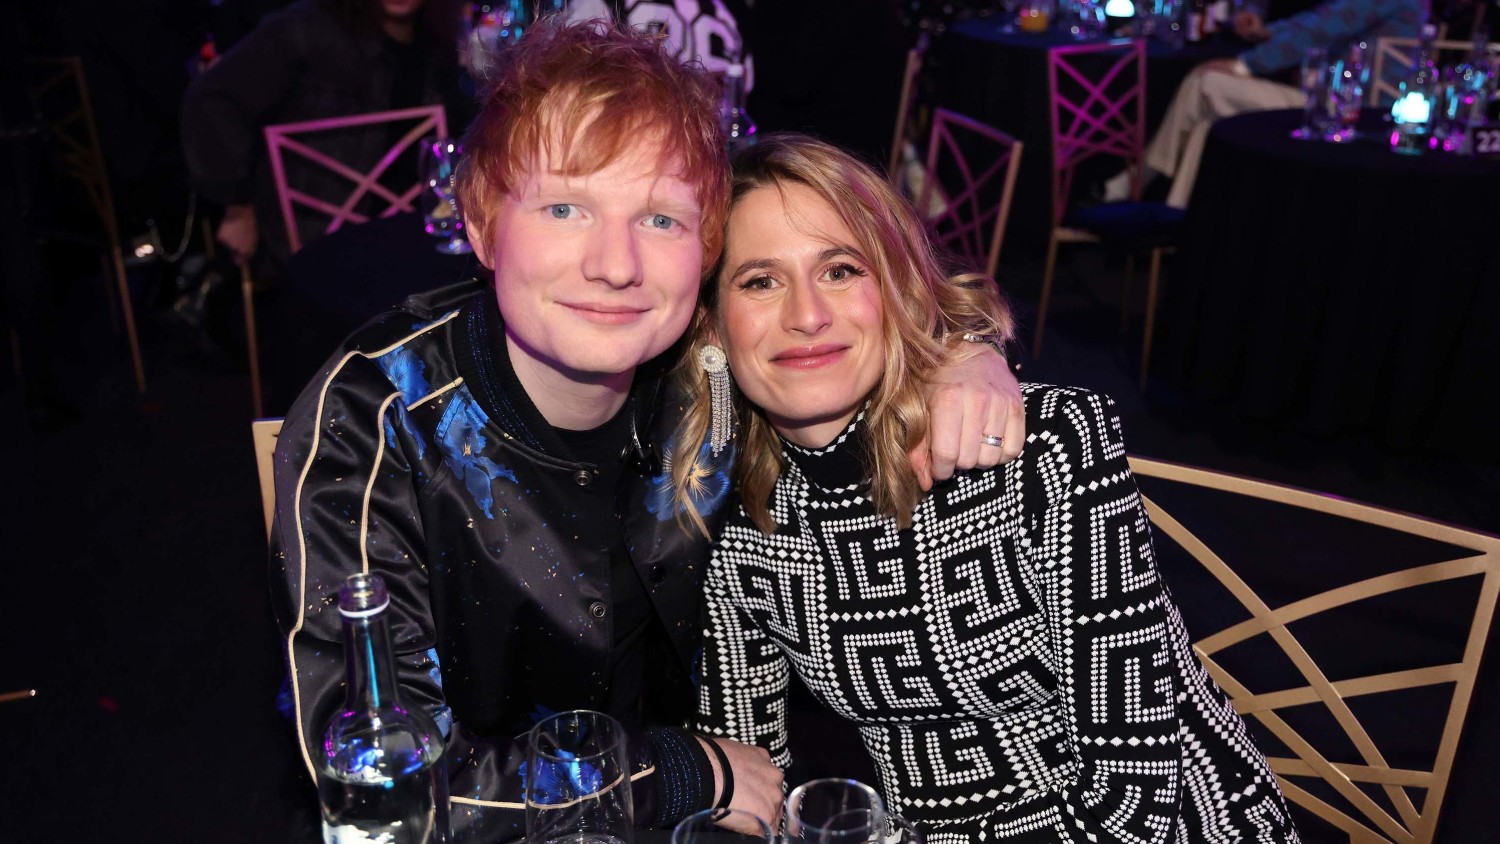 Ed Sheeran says his wife was diagnosed with tumor while pregnant